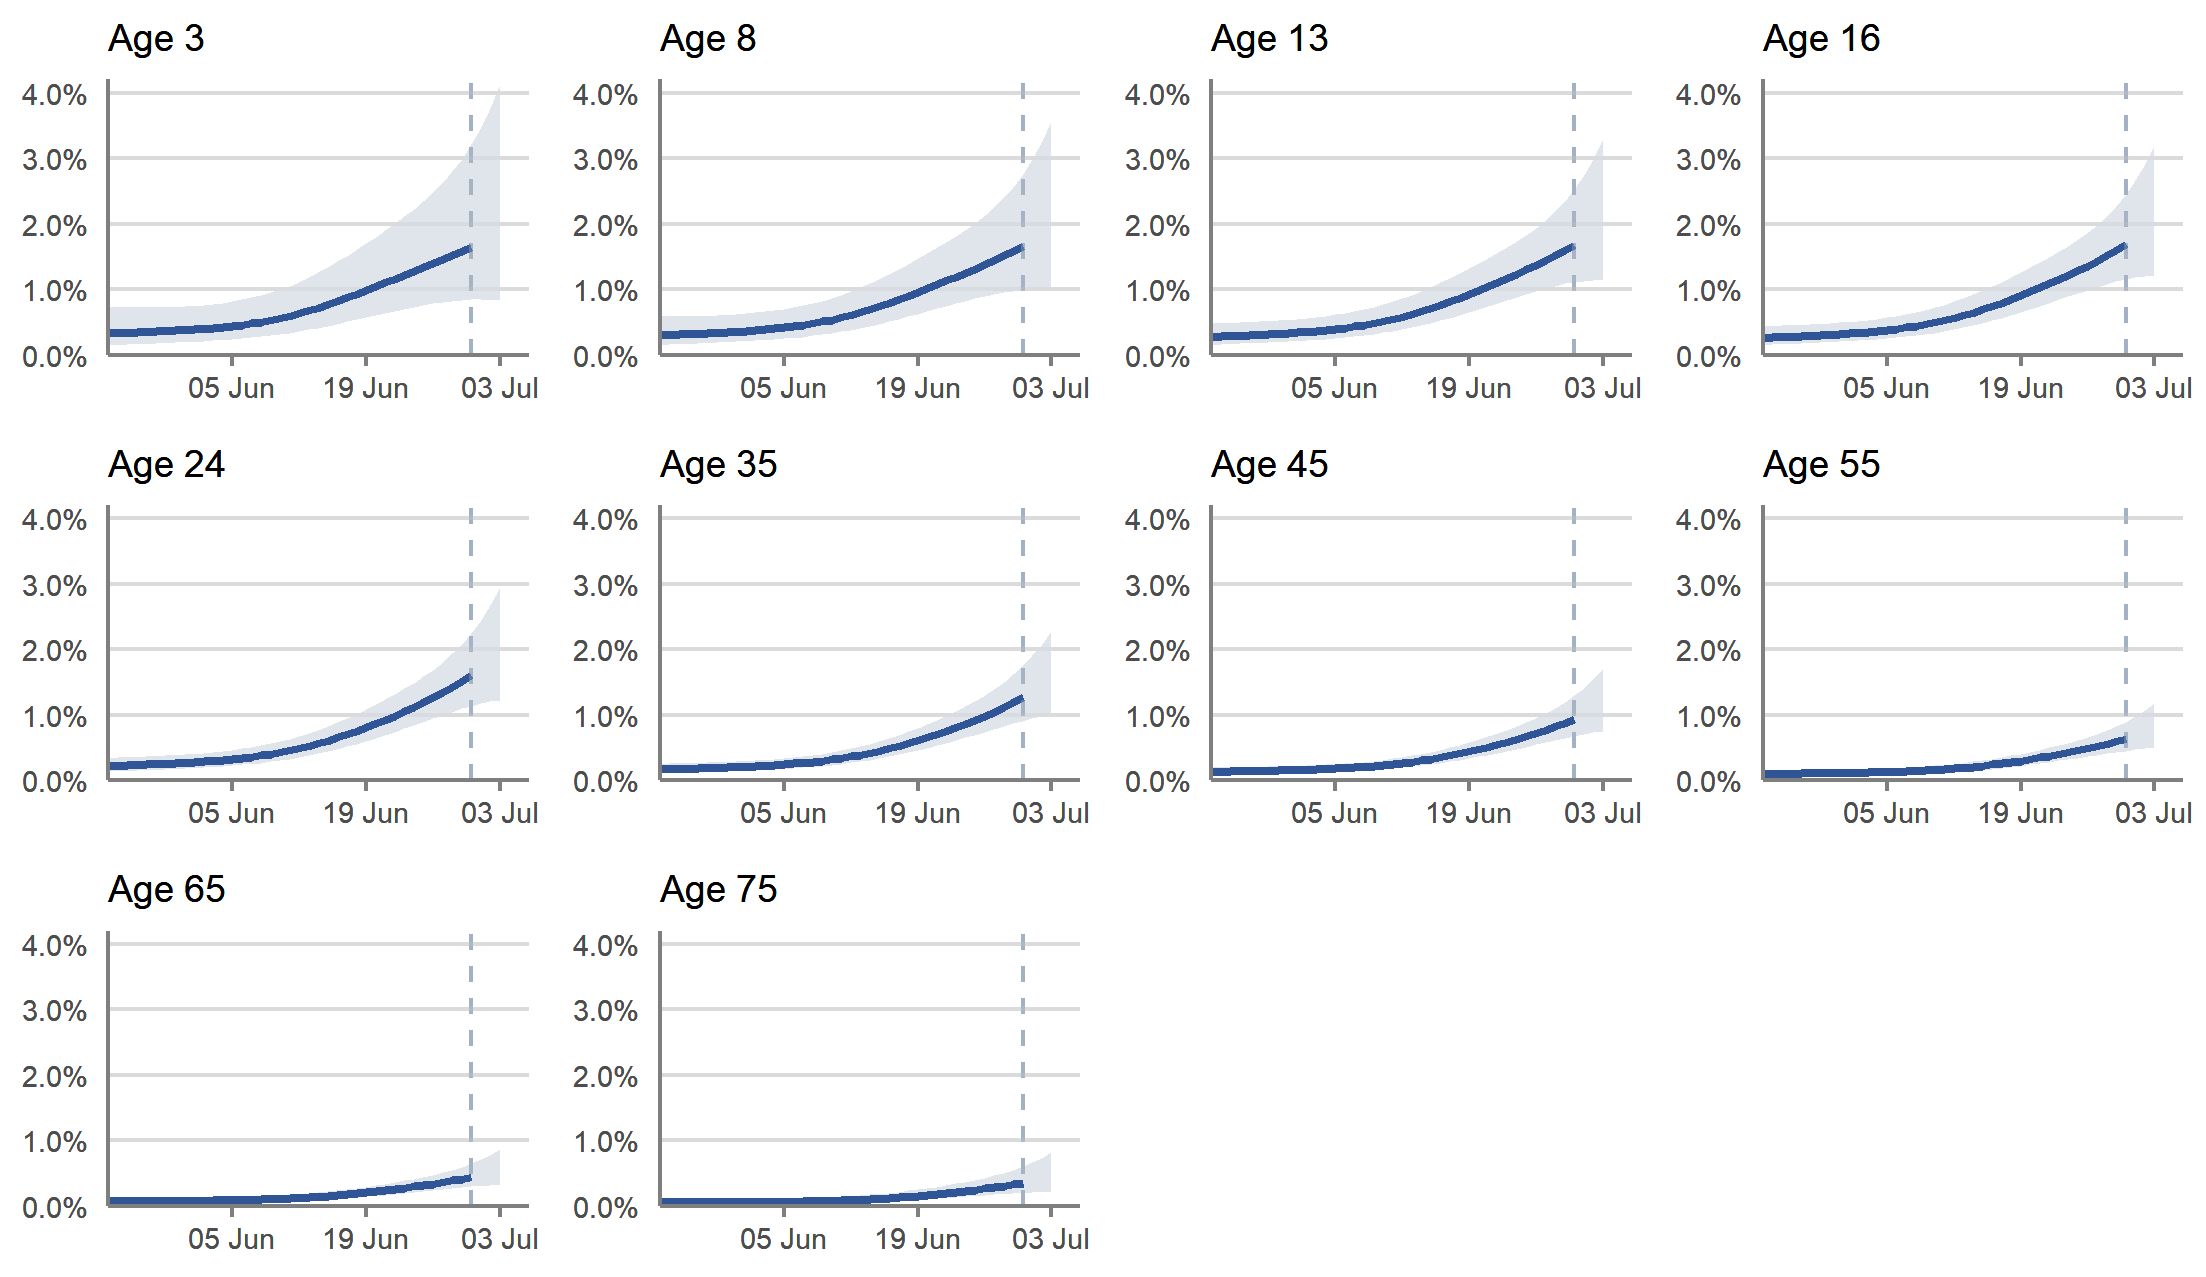 Figure 3: Modelled daily estimates of the percentage of the population in Scotland testing positive for COVID-19, by reference age, between 23 May and 3 July 2021, including 95% confidence intervals (see notes 2,5,6,8)